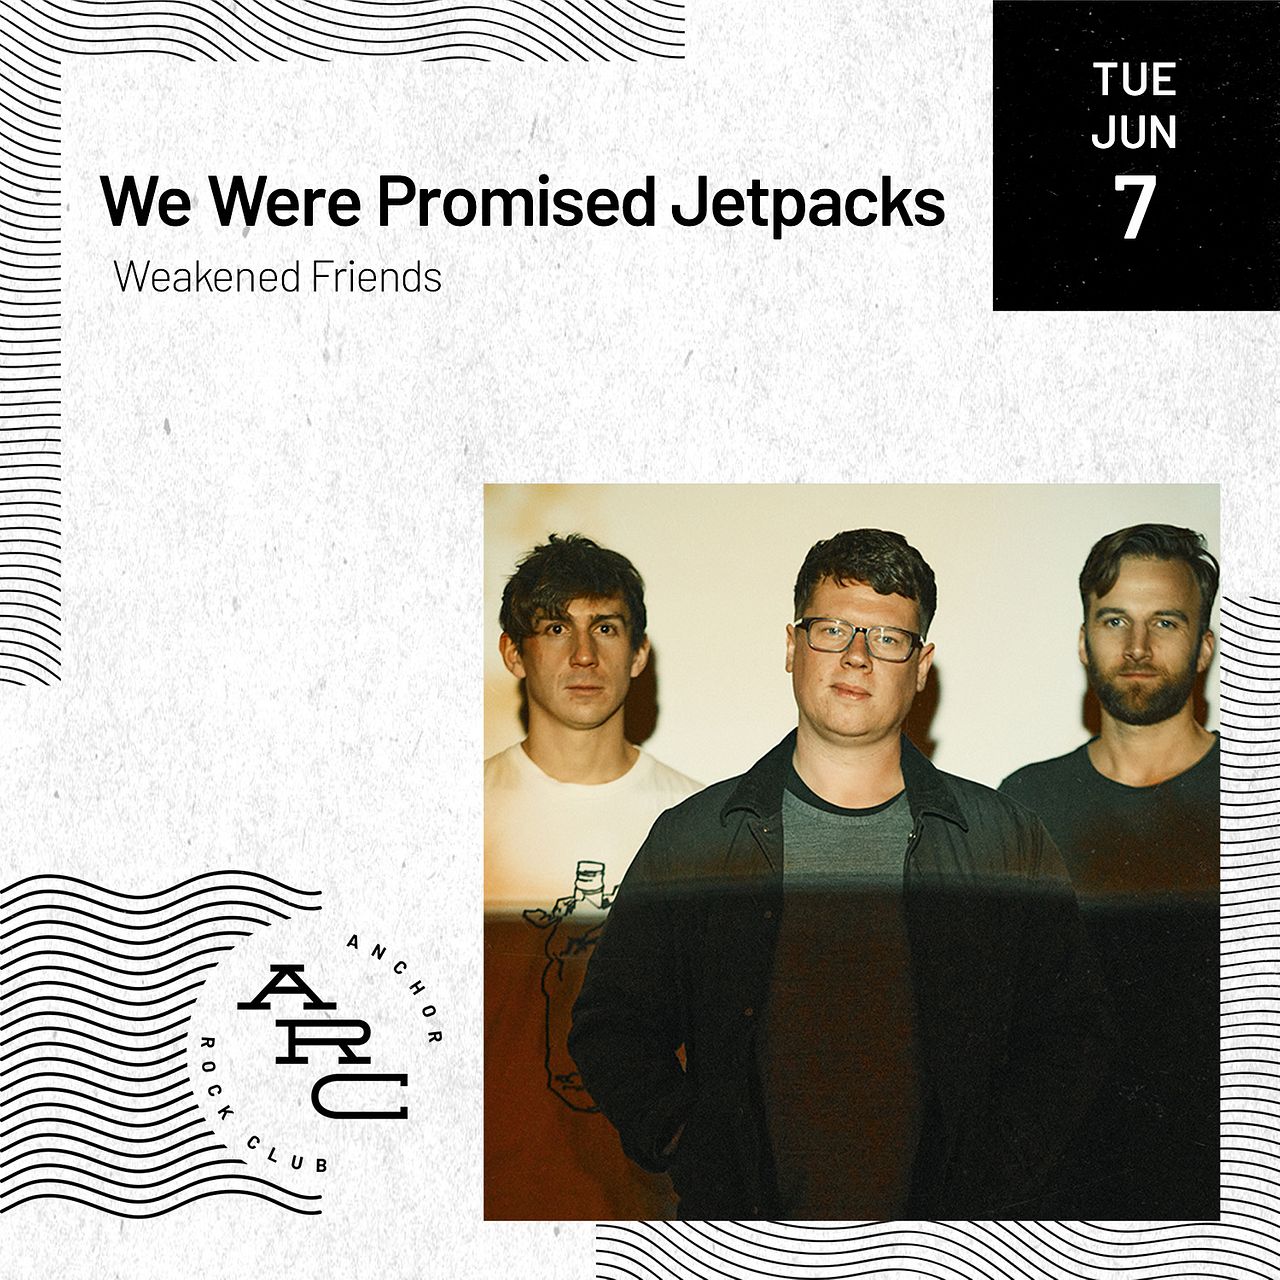 We Were Promised Jetpacks Tickets at Anchor Rock Club in Atlantic City